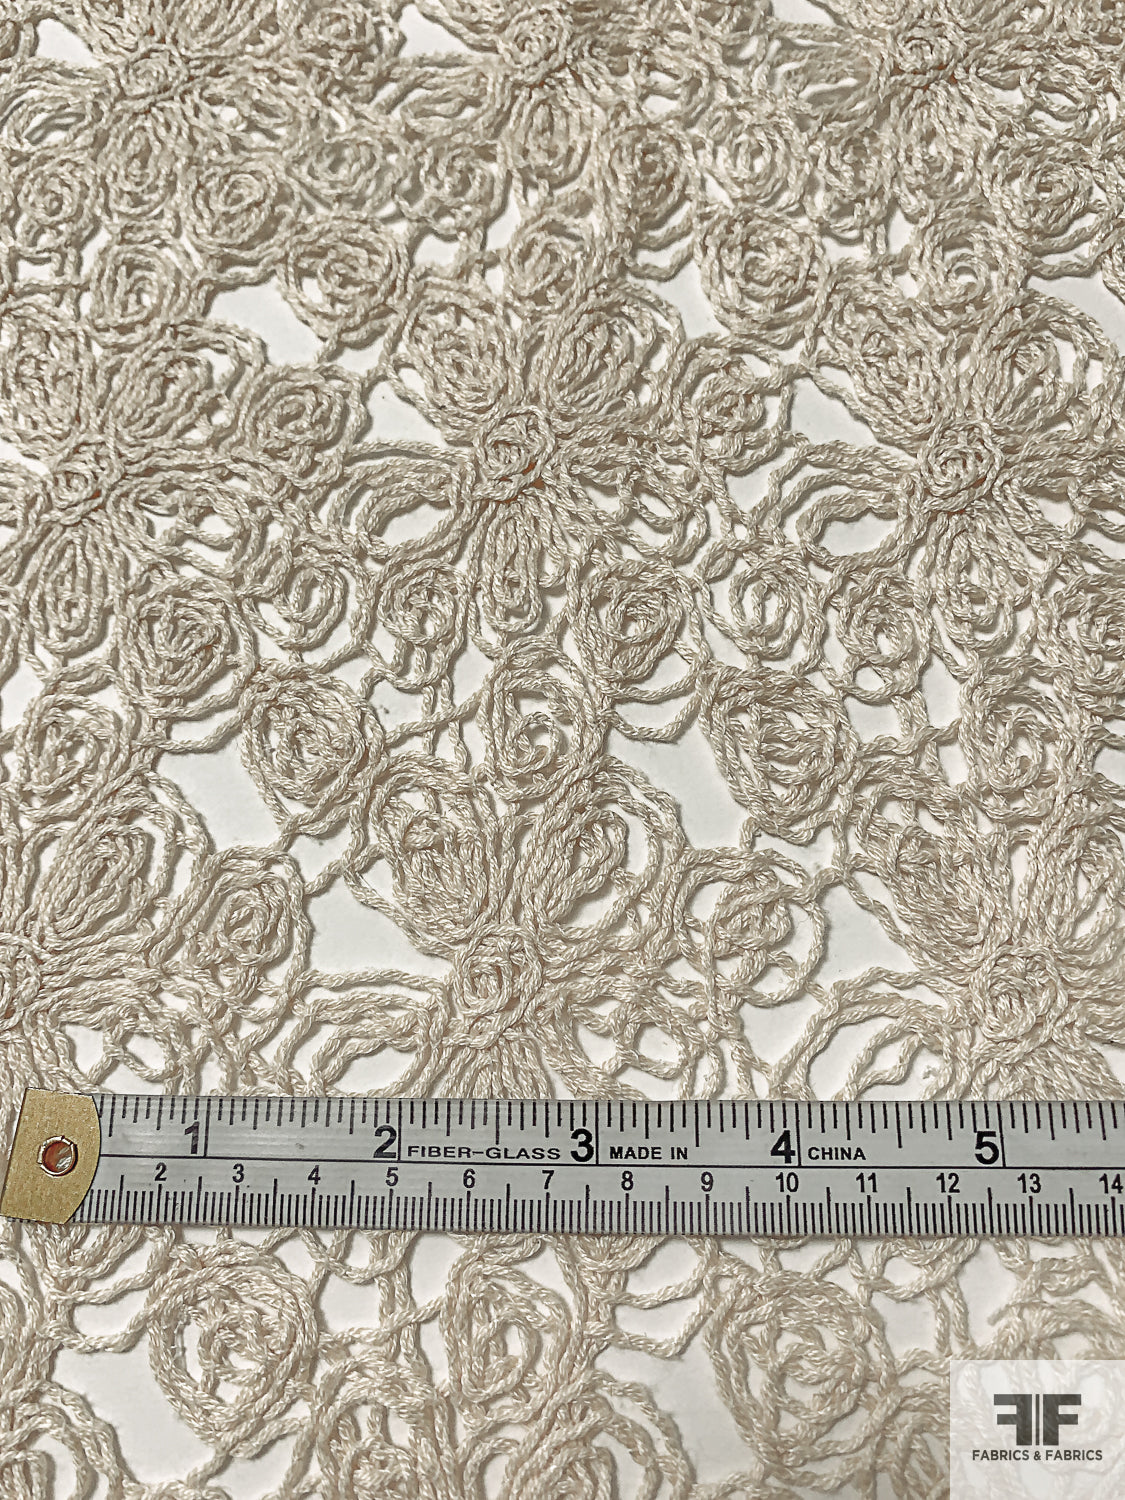 Italian Floral Novelty Crochet Lace - Natural Beige